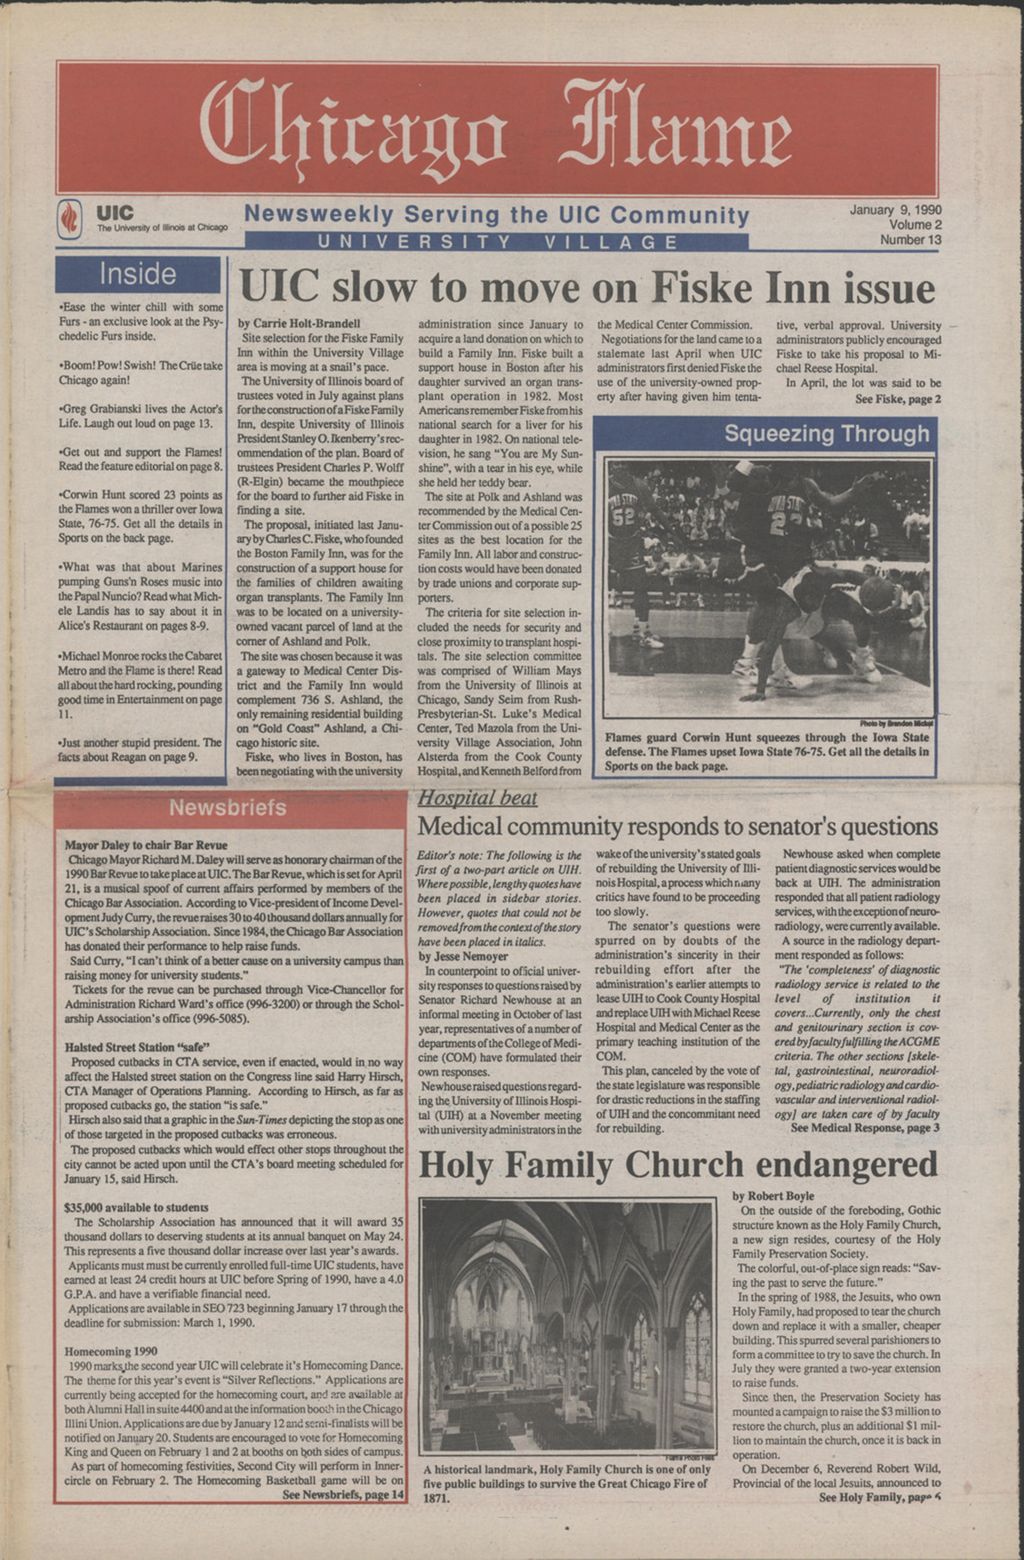 Miniature of Chicago Flame (January 9, 1990)